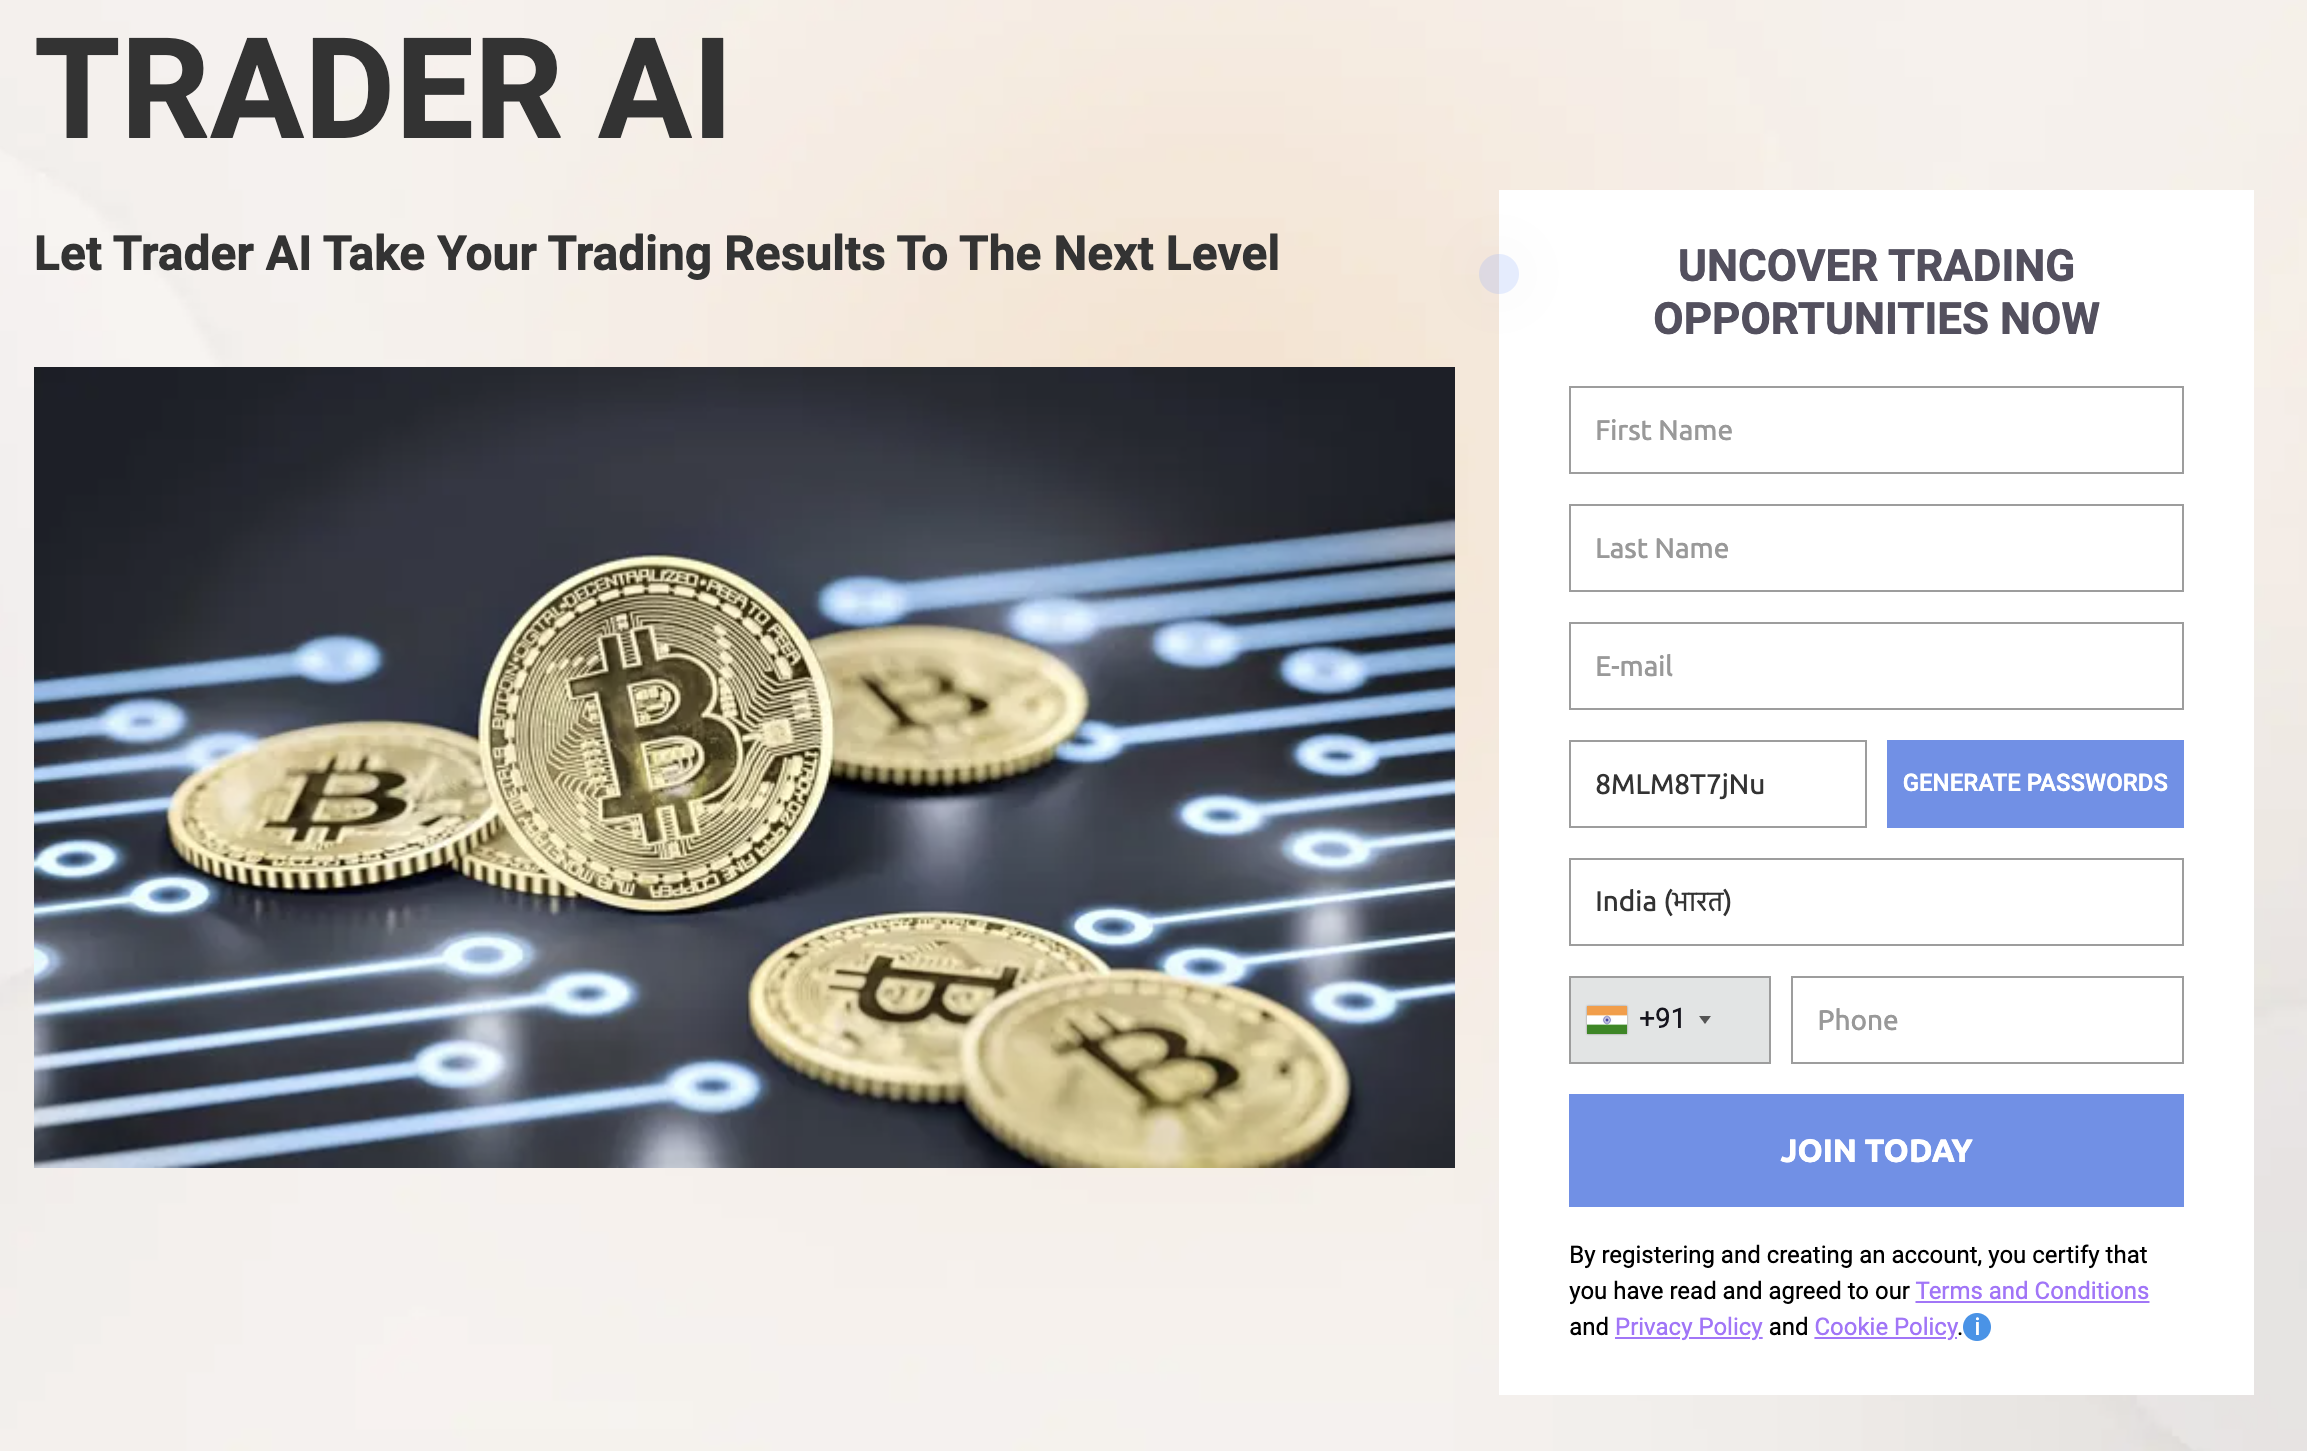 Scam Advisory On Investment Scams Promoting Bitcoin Trading